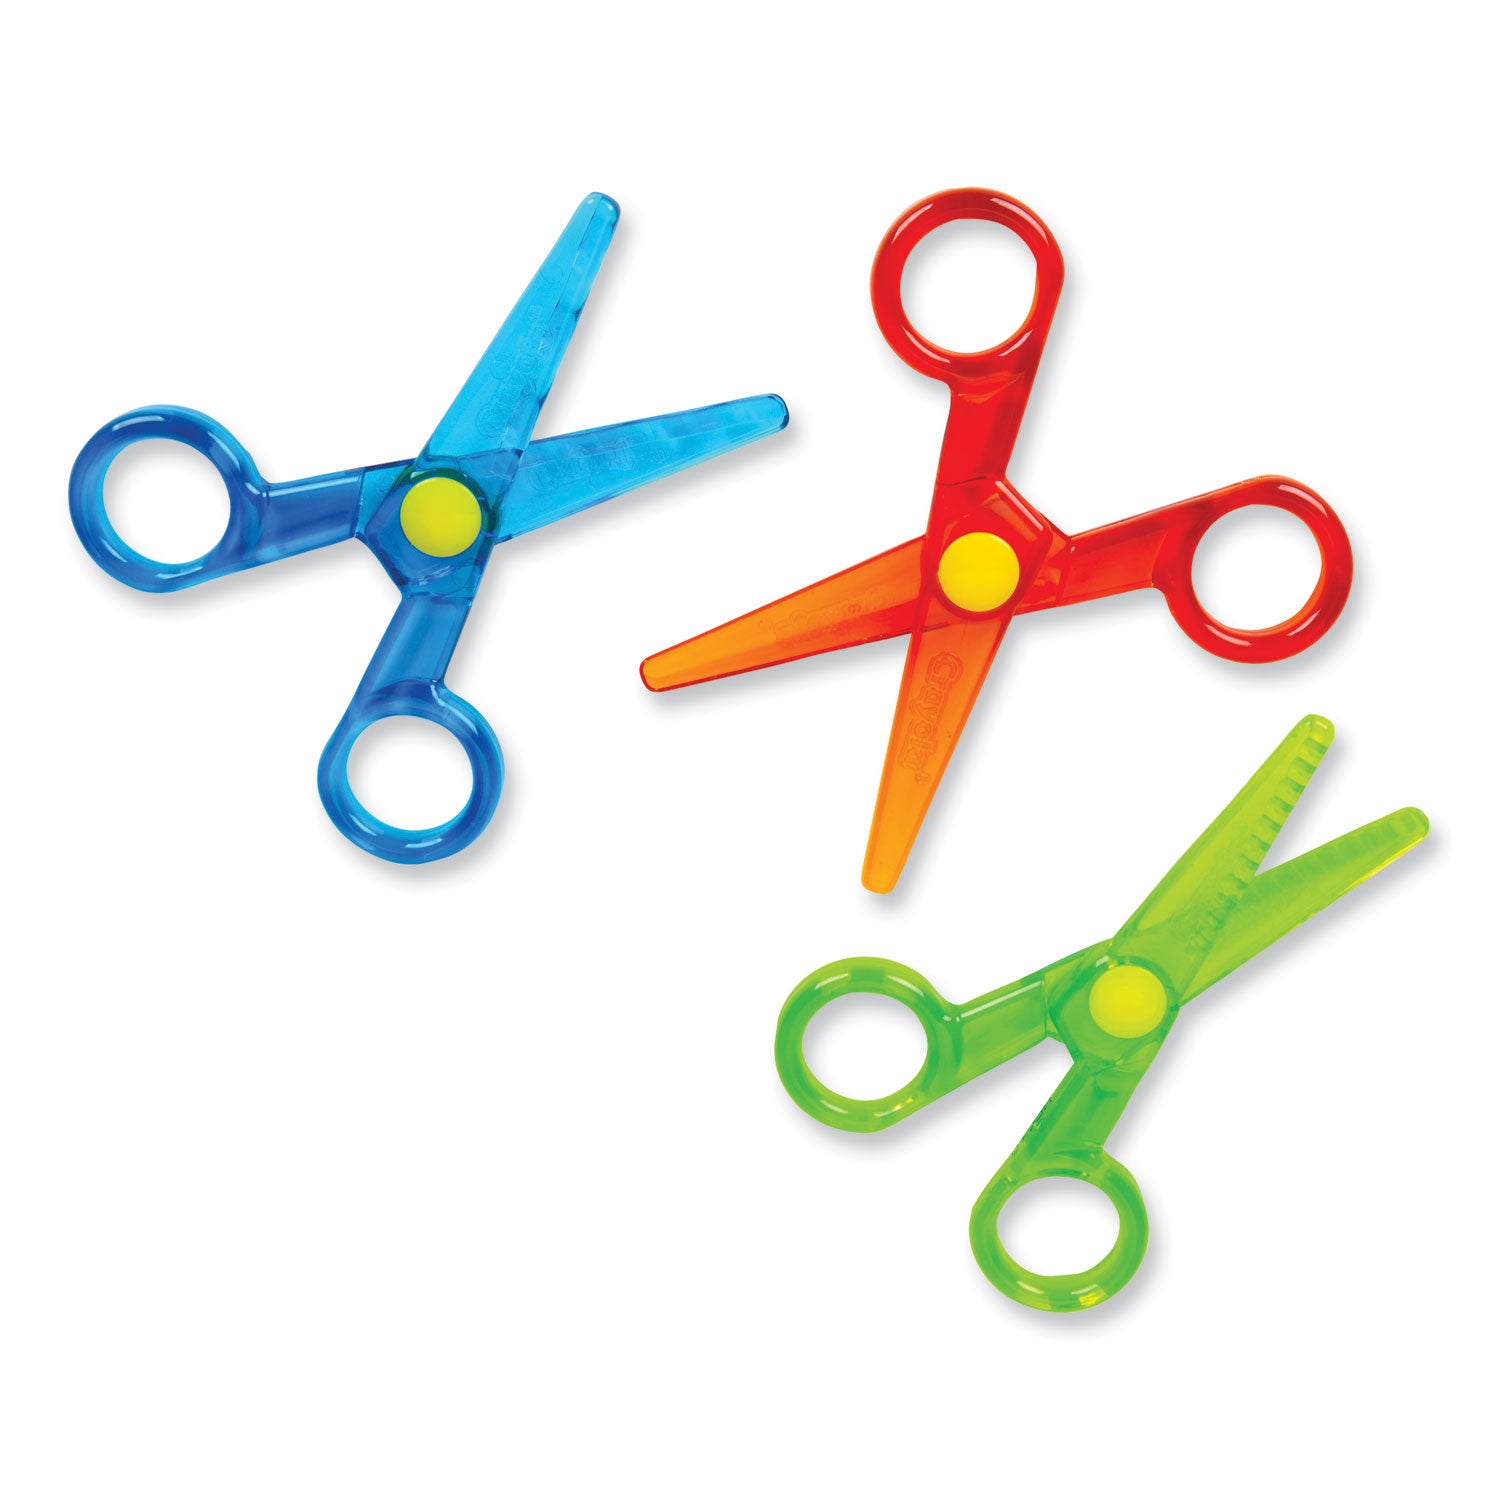 safety-scissors-rounded-tip-straight-handle-assorted-handle-colors-3-pack_cyo811458 - 5